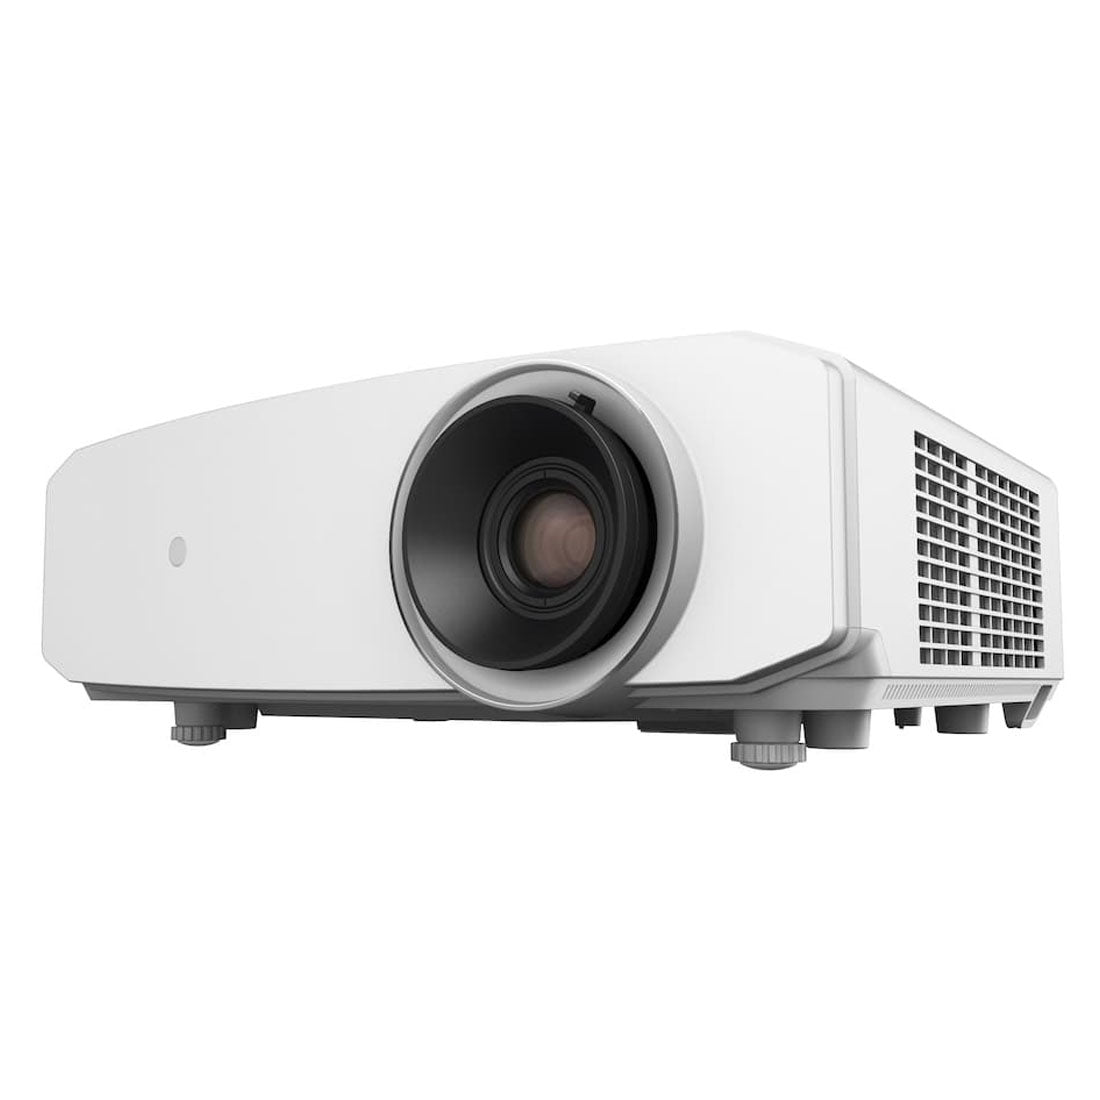 JVC LX-NZ30W 4k/HDR Home Theater DLP Laser Multimedia/Gaming Projector 3300 Lumens - White